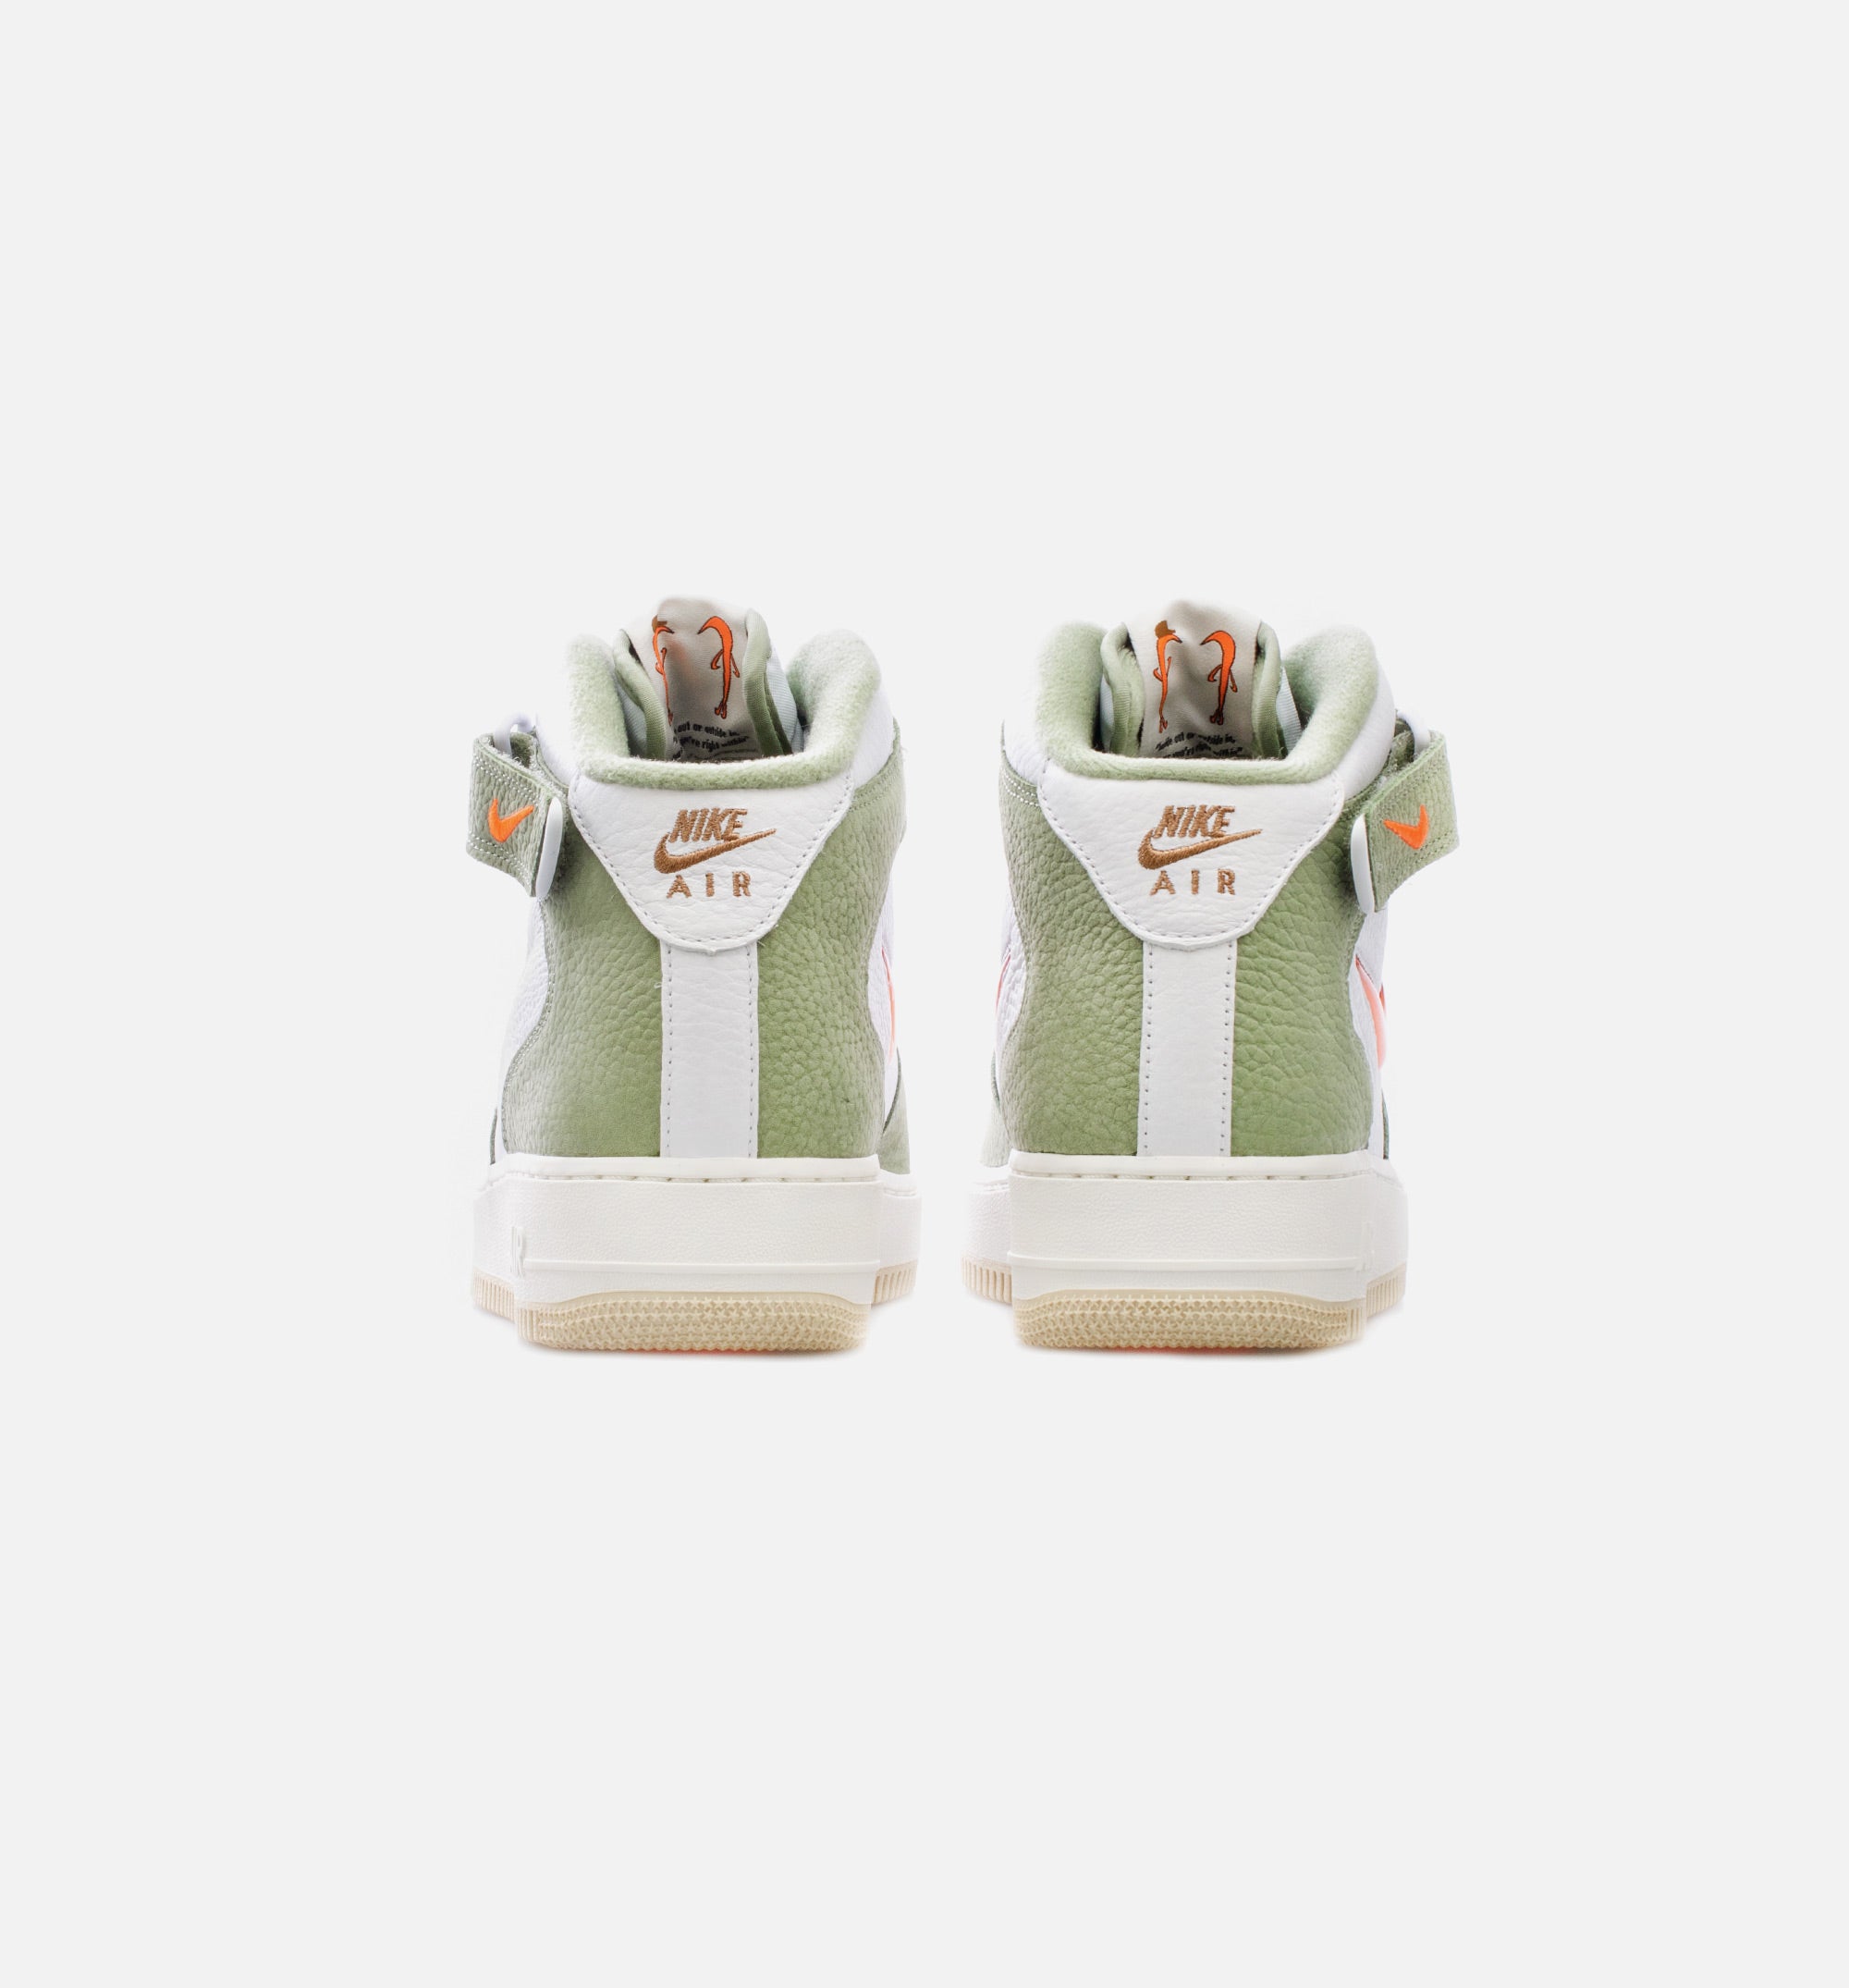 New Nike Air Force 1 Mid '07 QS Shoes Sneakers - Olive Green/ White  (DQ3505-100)